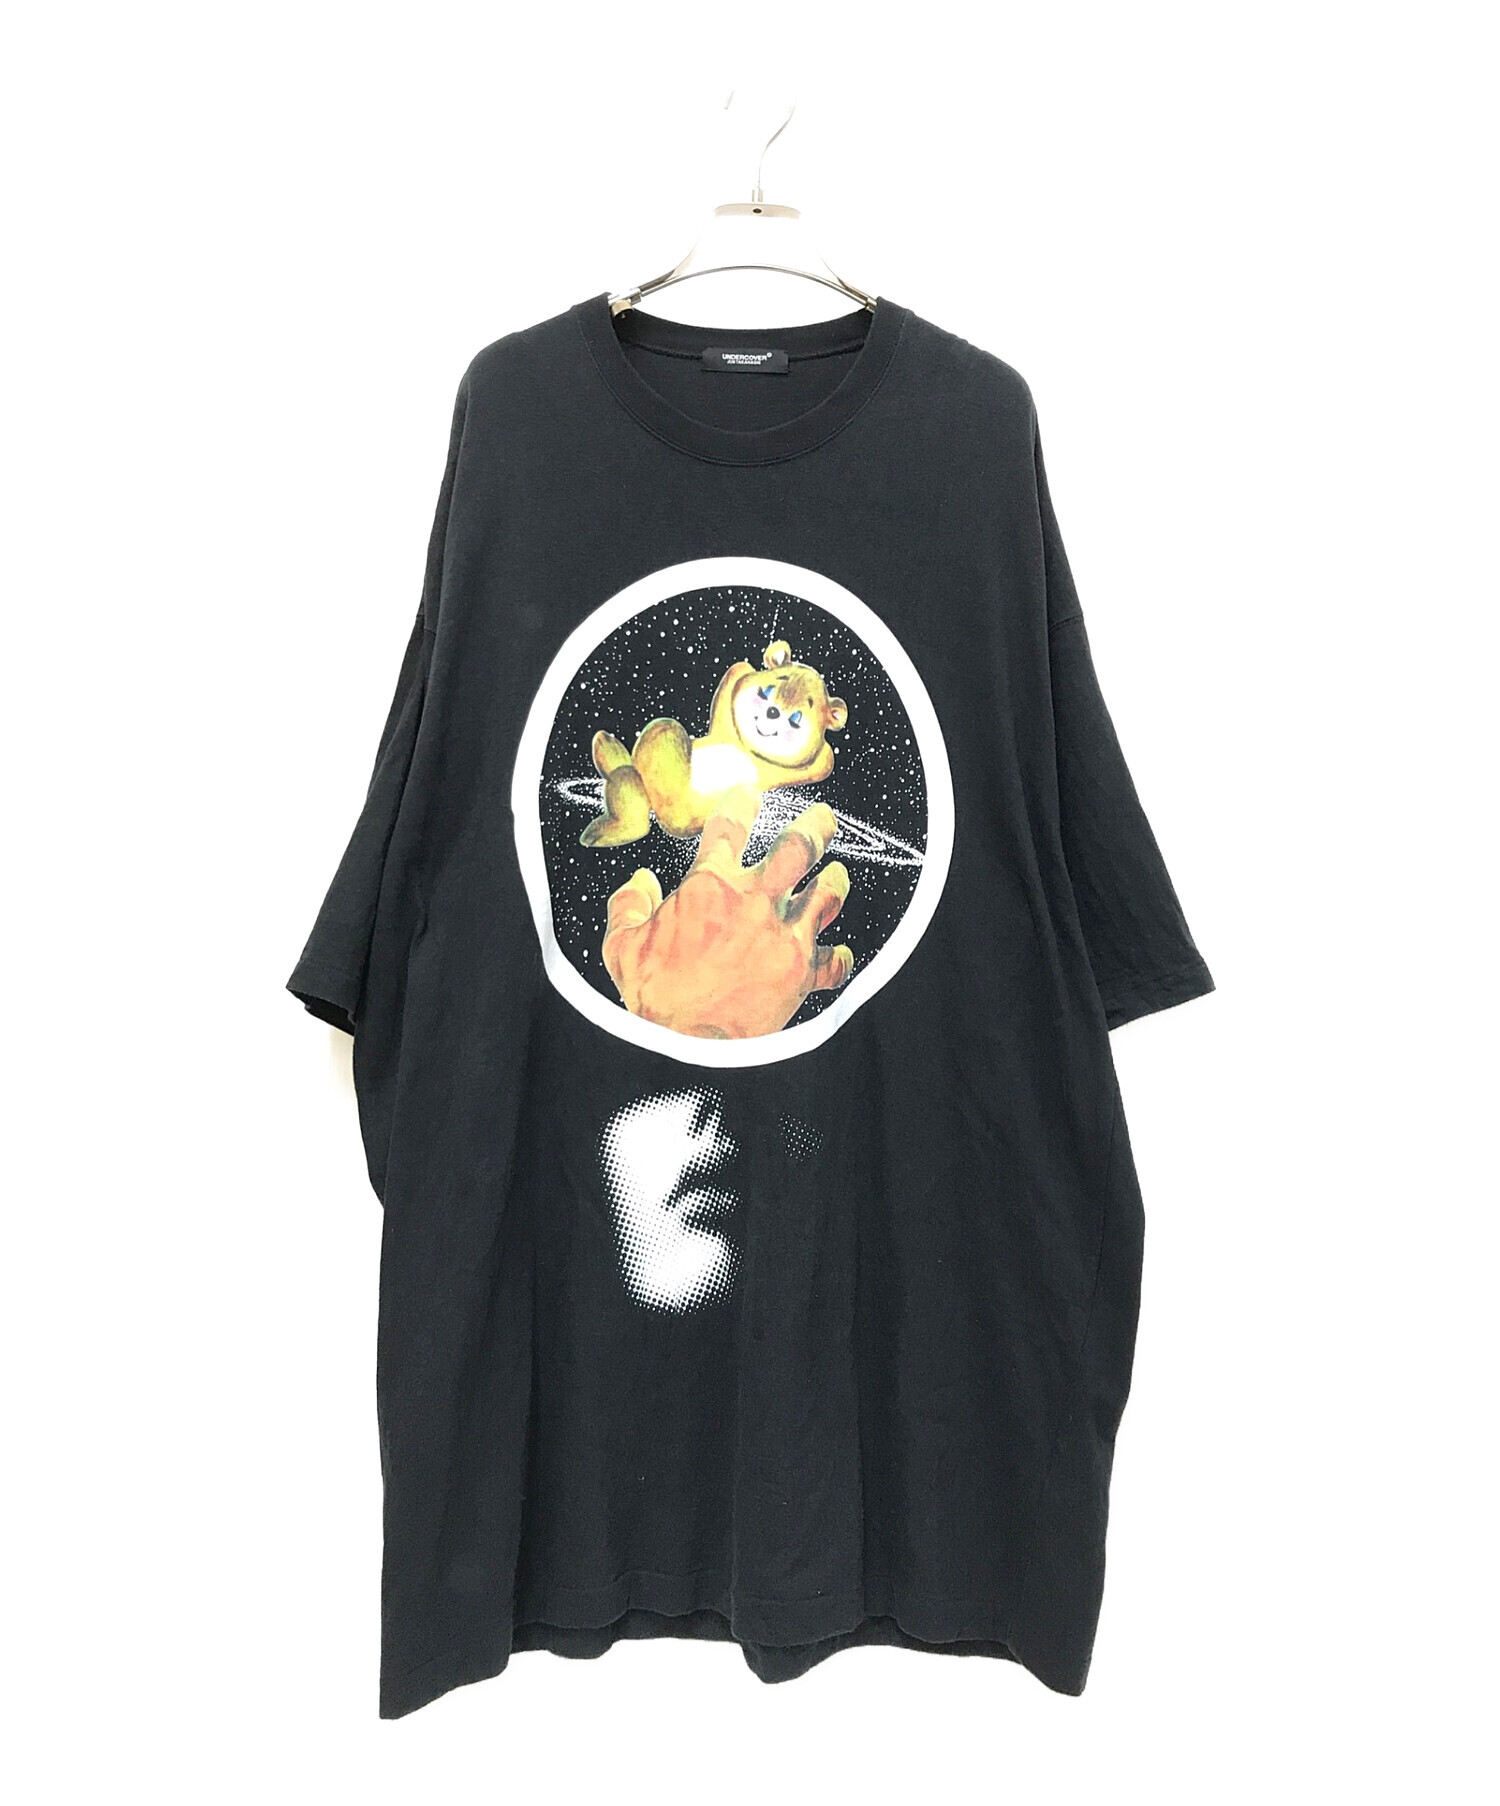 Tシャツ/カットソー(半袖/袖なし)UNDERCOVER BIGTEE LIFE IS THE COSMOS